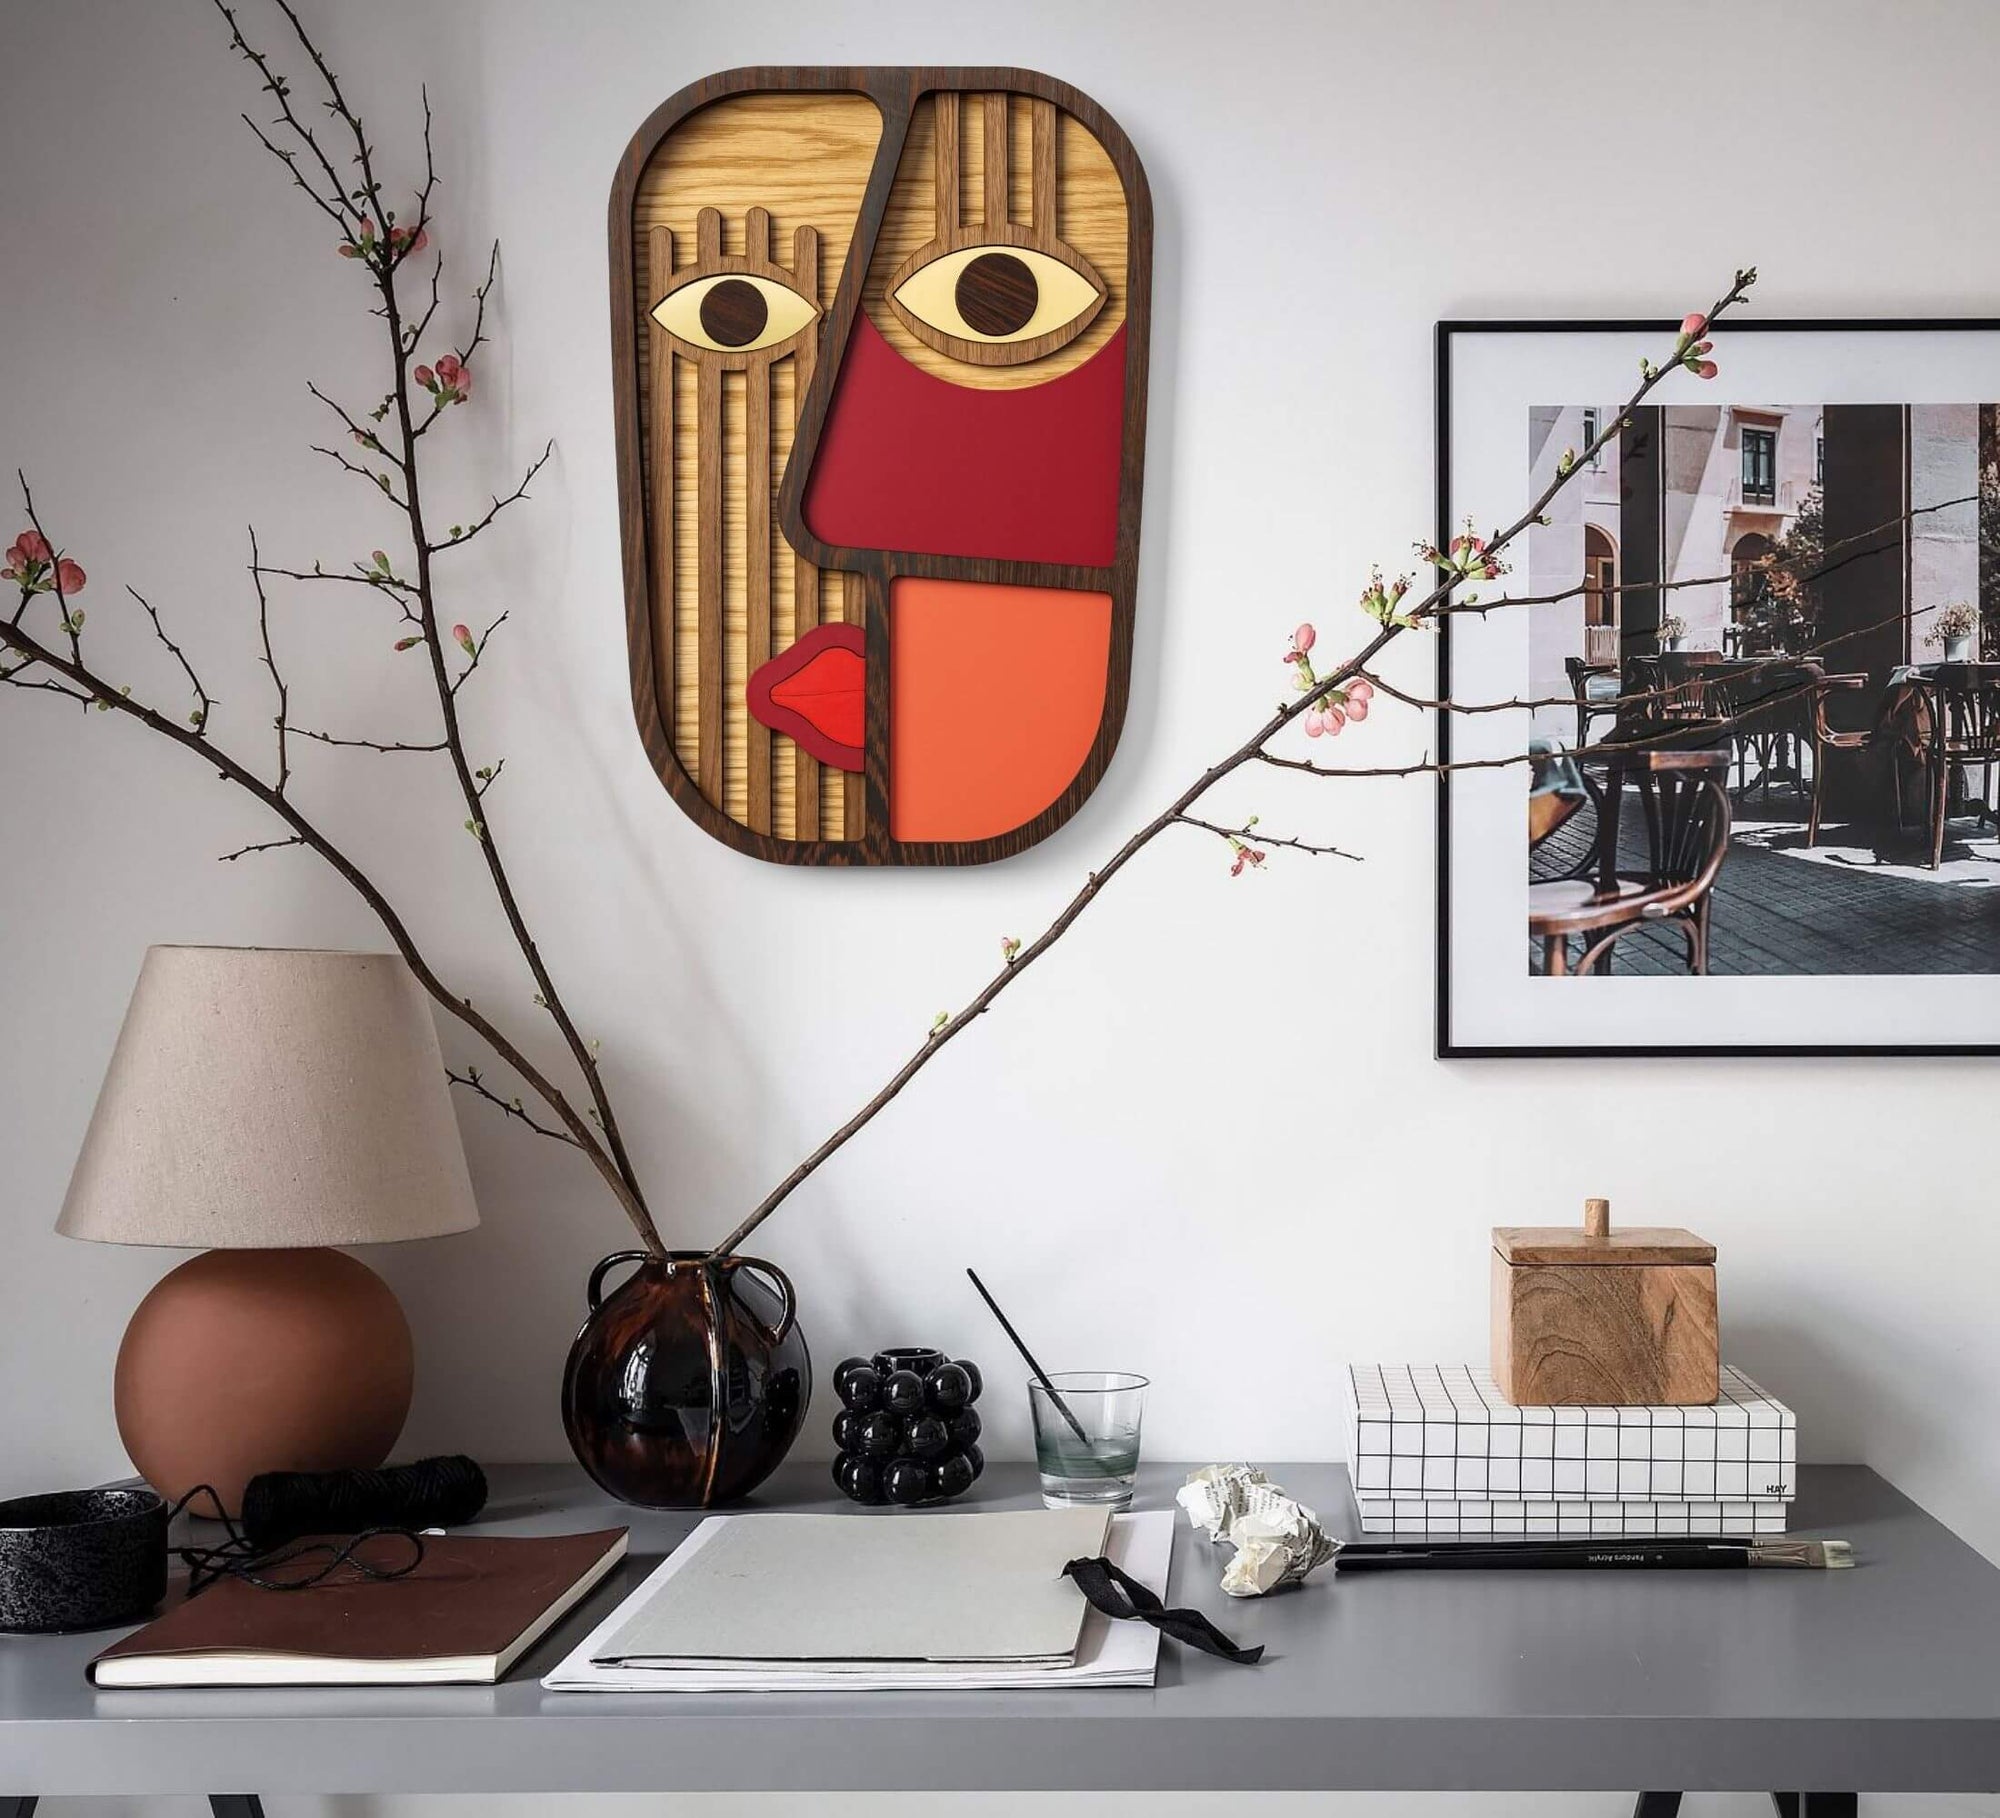 Is your wall looking a little drab? Liven it up with colorful faces!